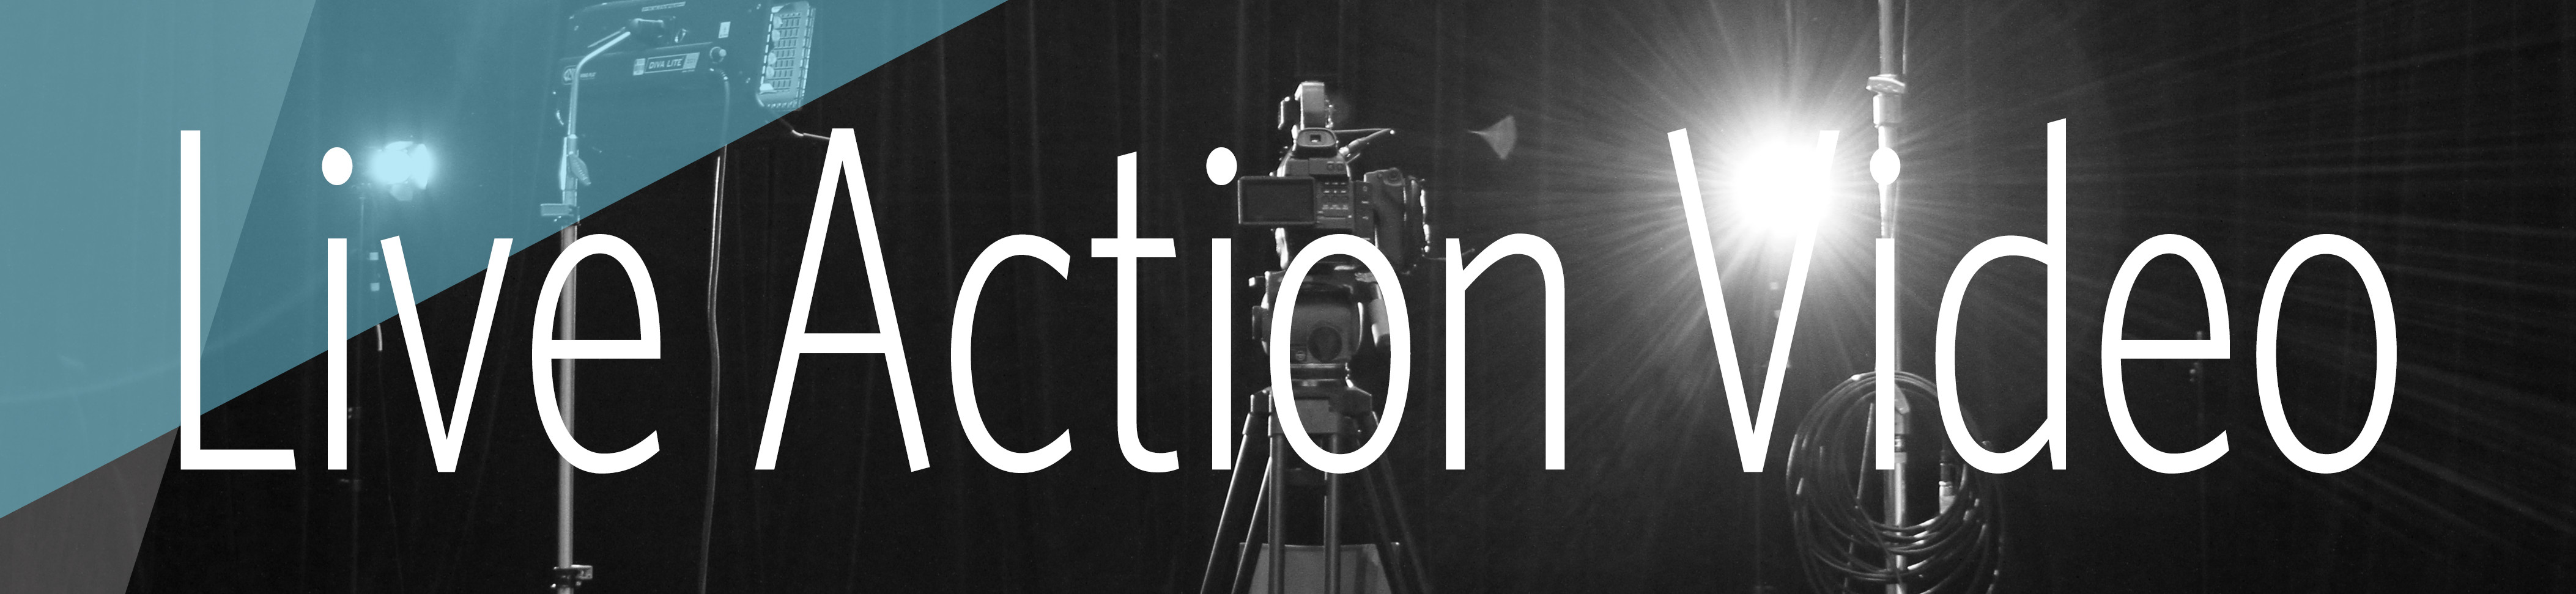 Live_Action_Video